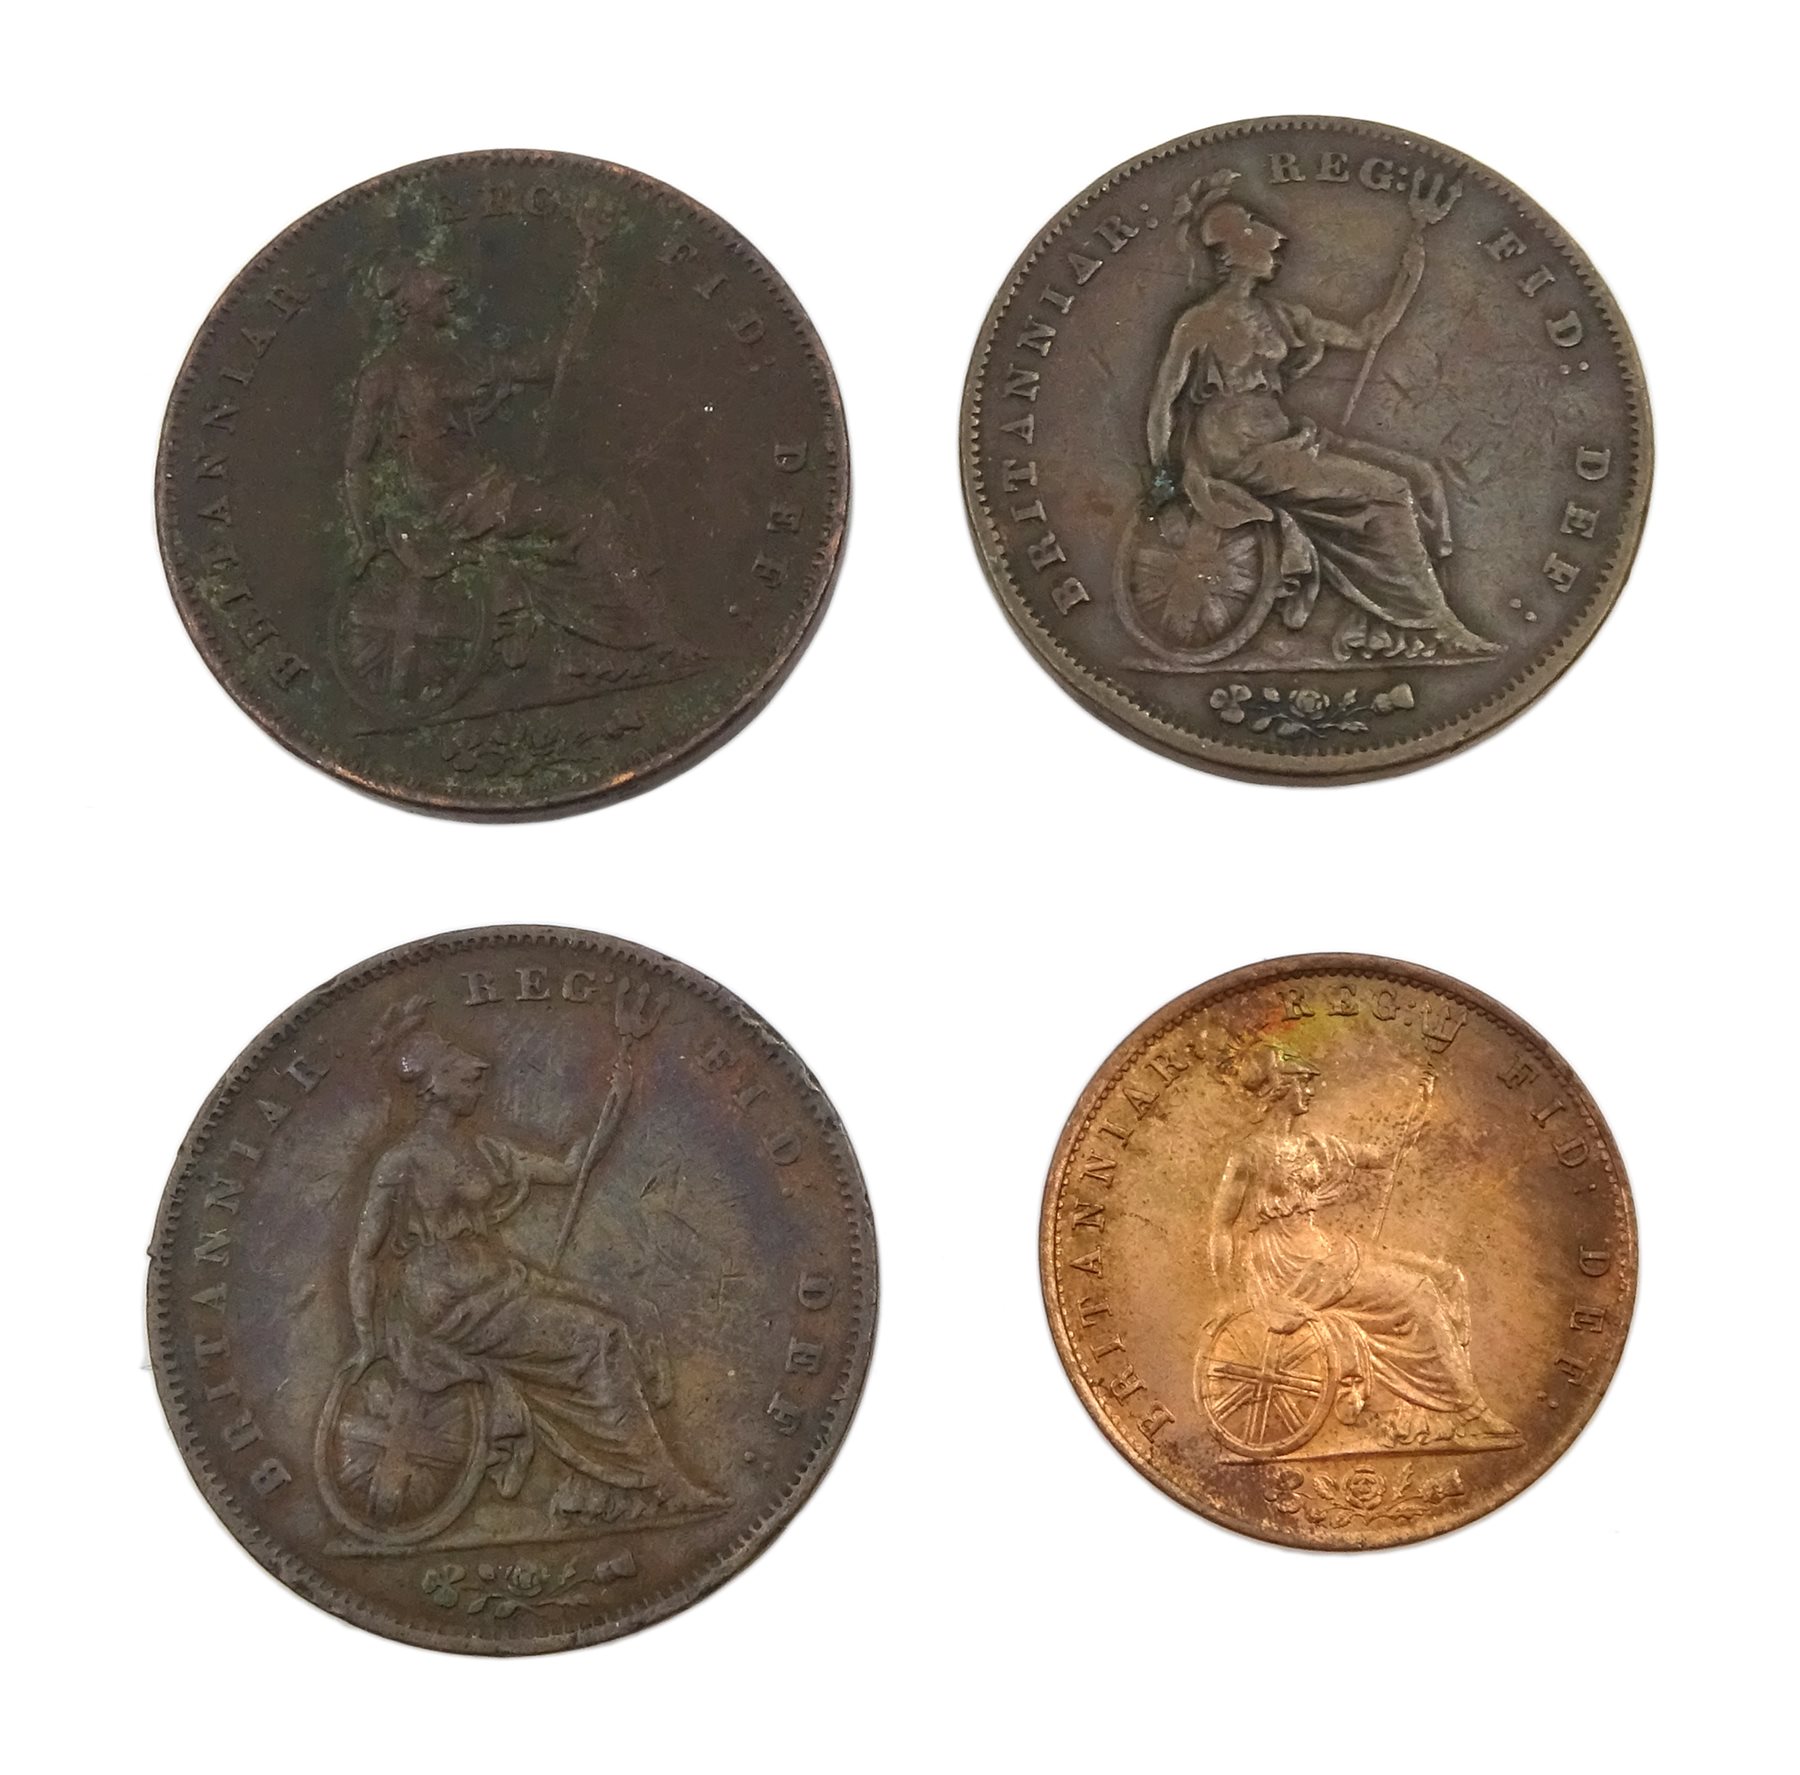 Three Queen Victoria pennies dated 1848, 1853 and 1854 and a Queen